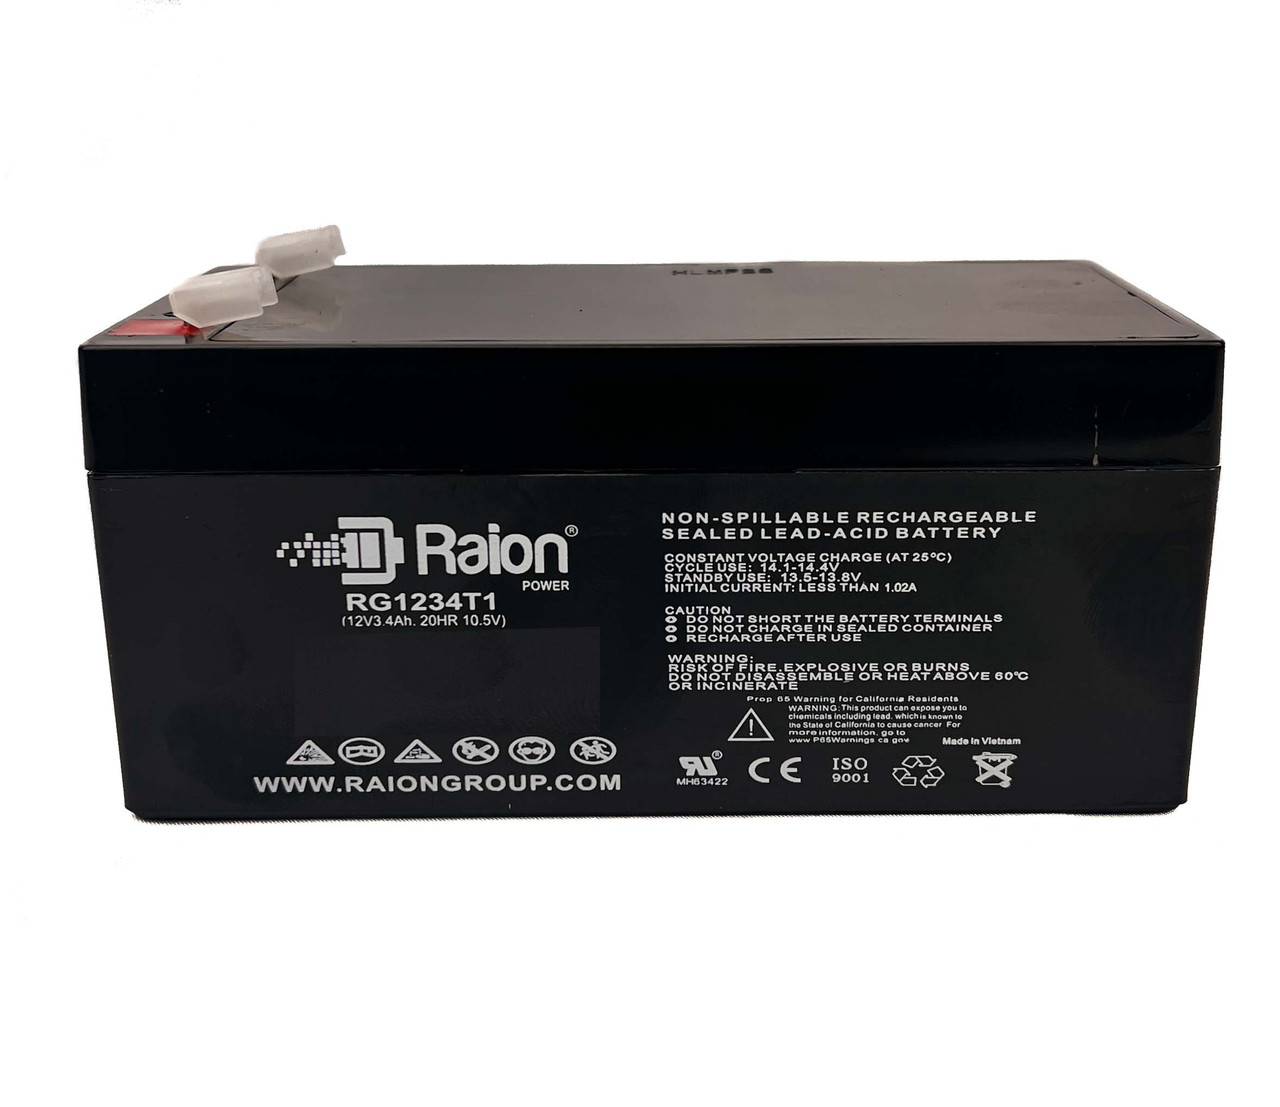 Raion Power RG1234T1 Rechargeable Compatible Replacement Battery for SAITE BT-12M3.3AT